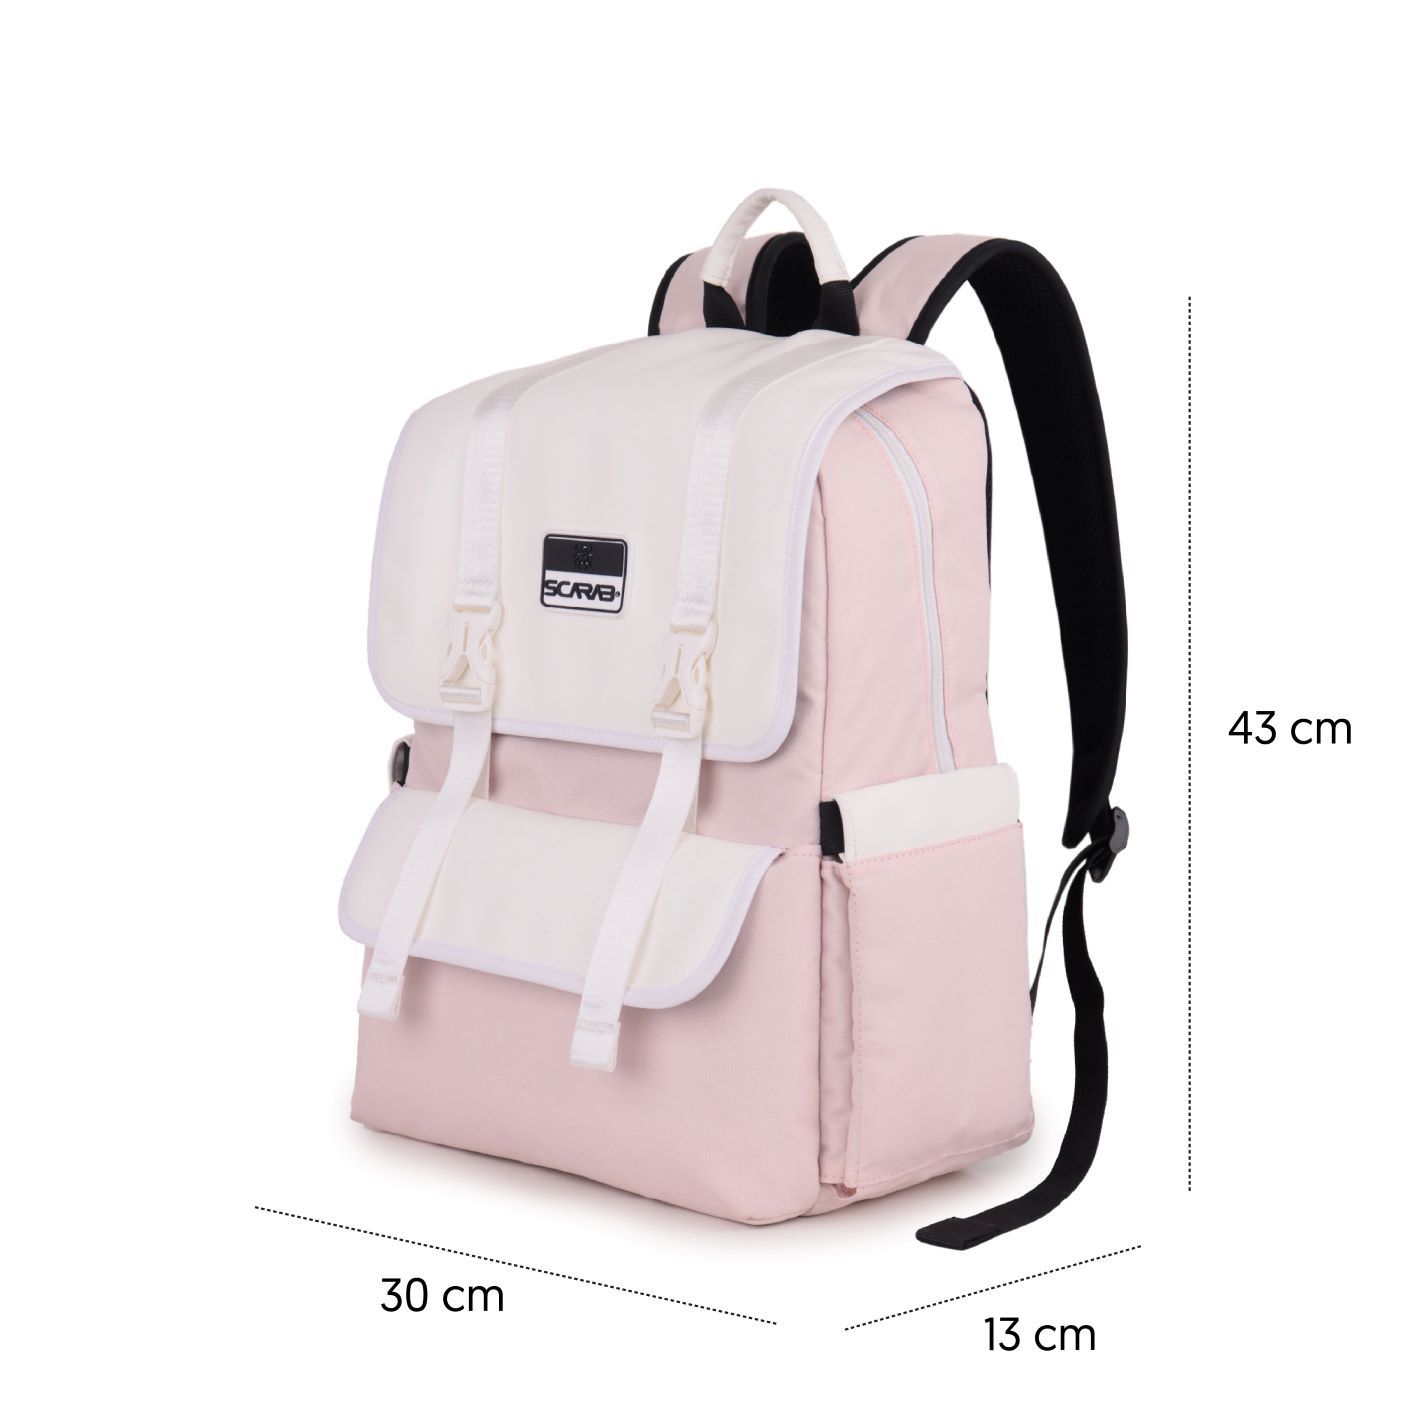  Passion Backpack - Baby Pink 